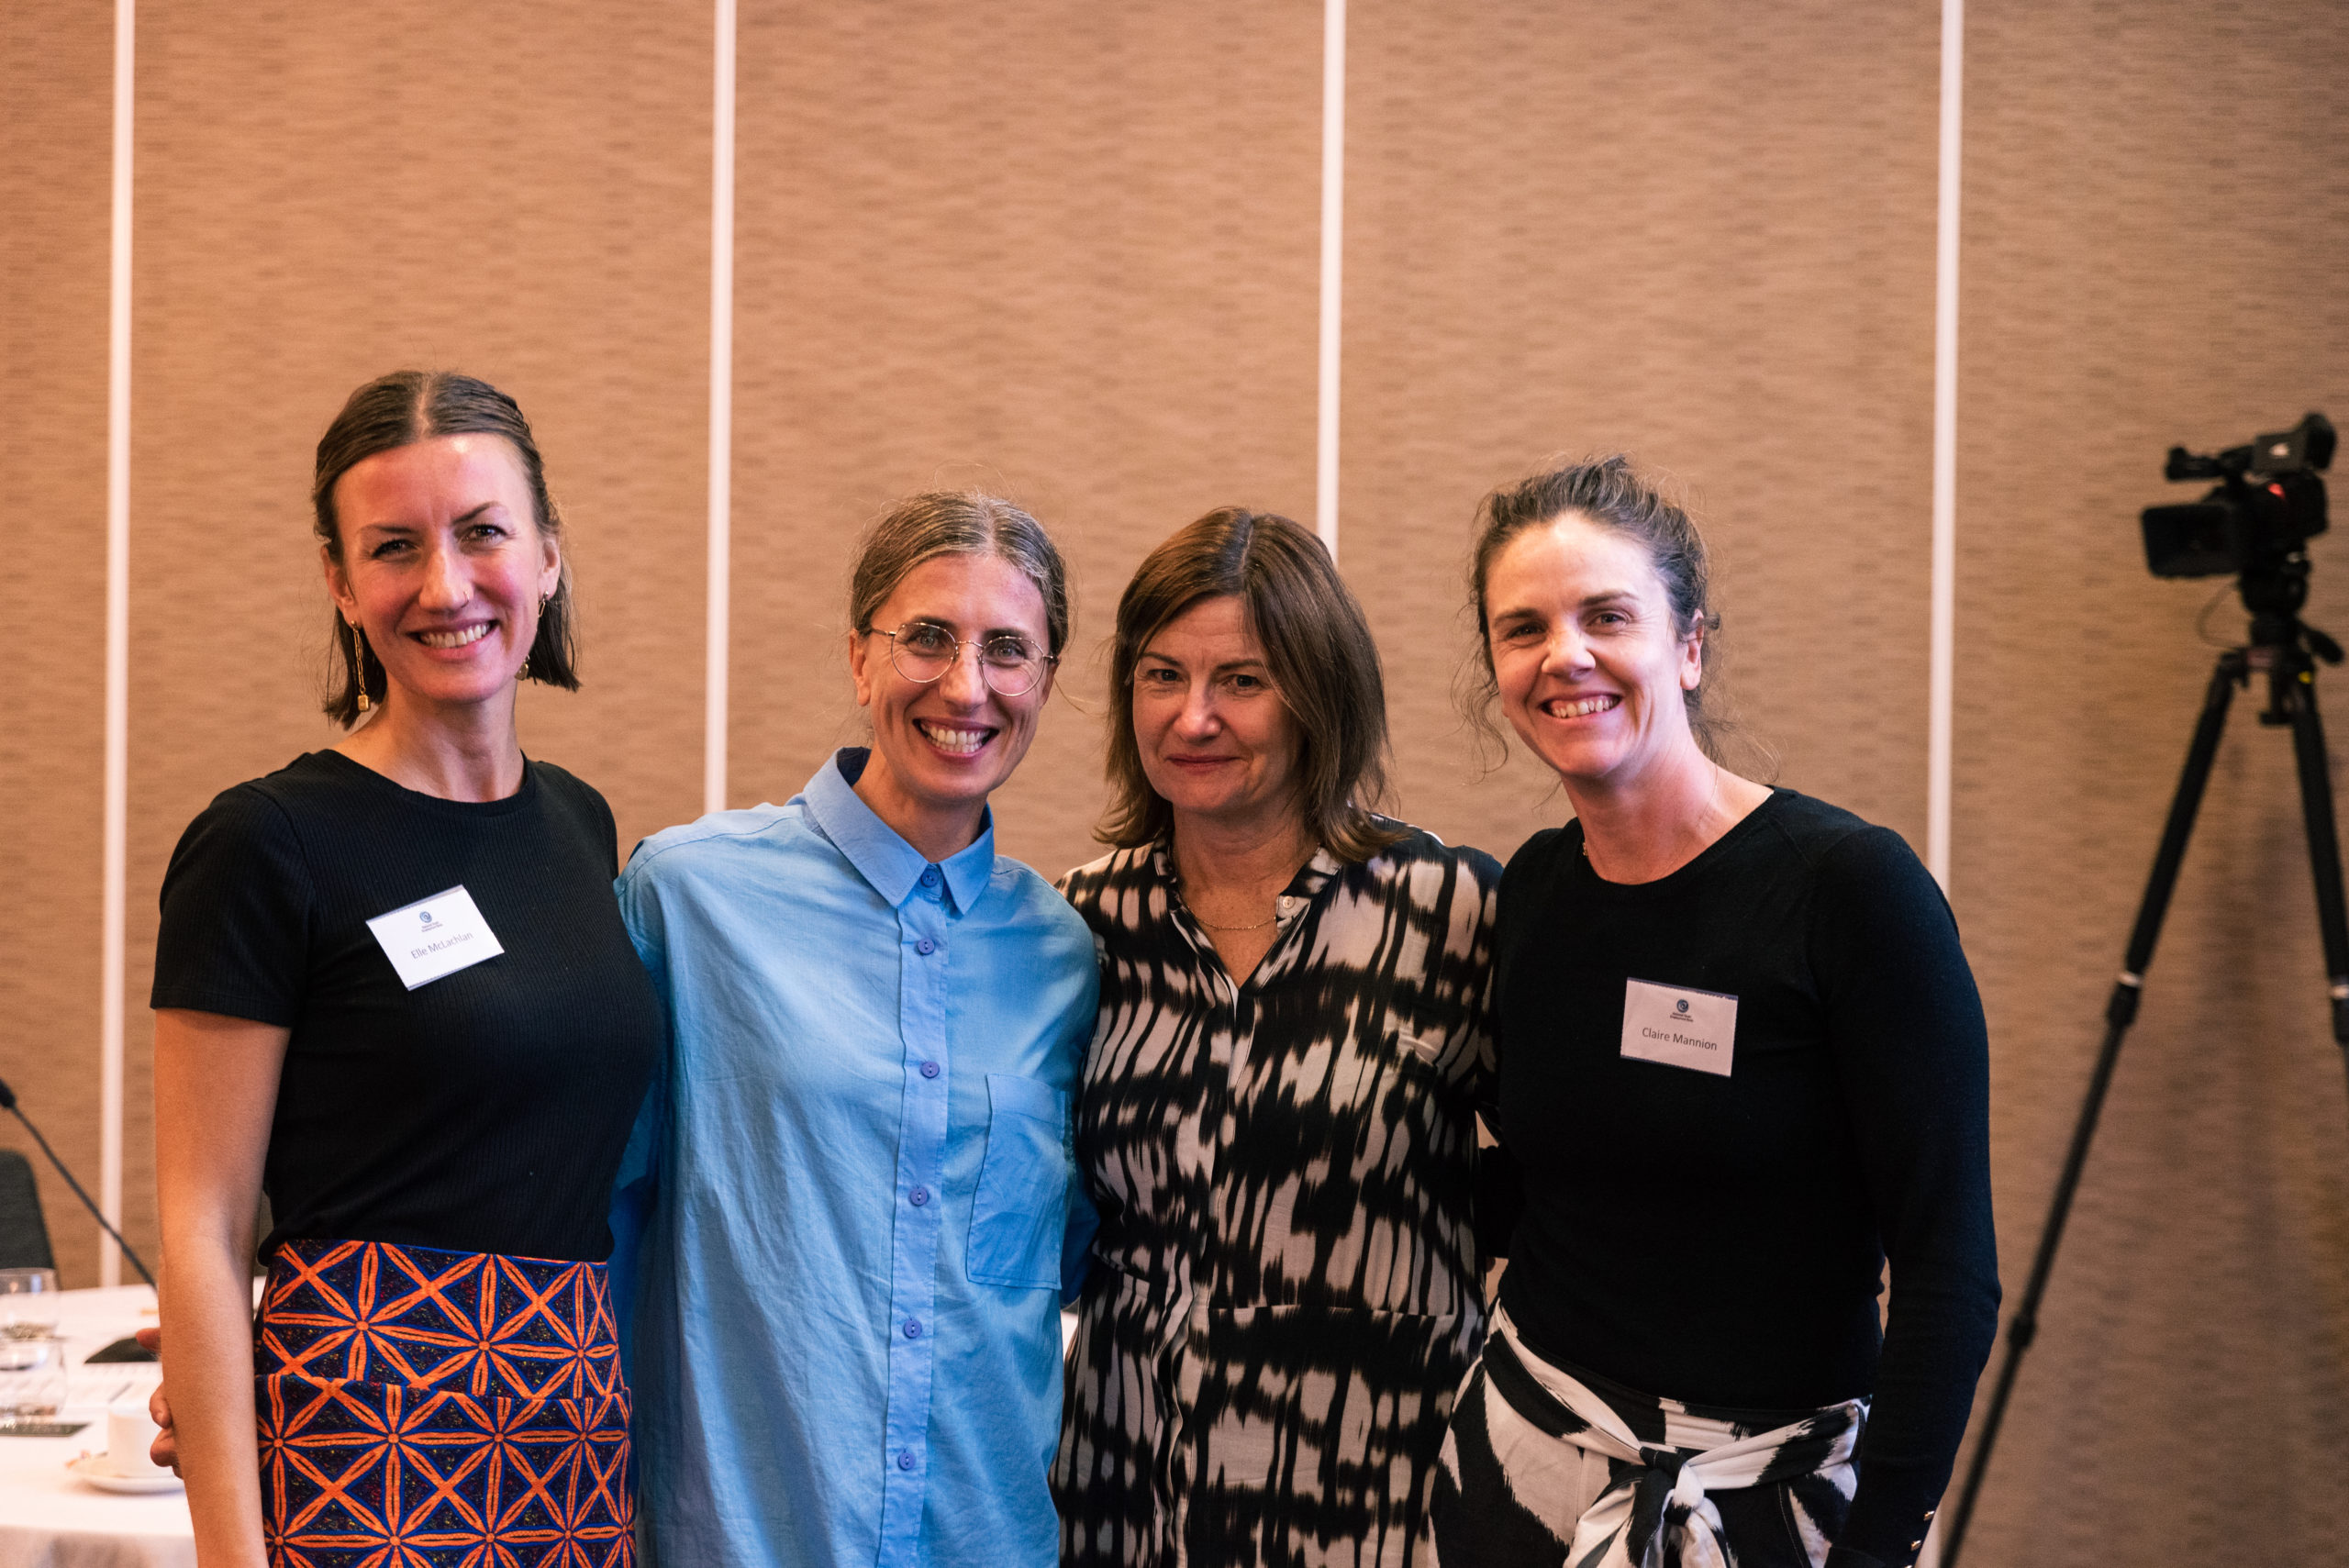 (L-R): Elle McLachlan  (Program Manager, NYEB), Elmina Jodic (Head of Youth, BSL), Jenny Wheatley (VFFF CEO) and Claire Mannion (VFFF Senior Program Manager)